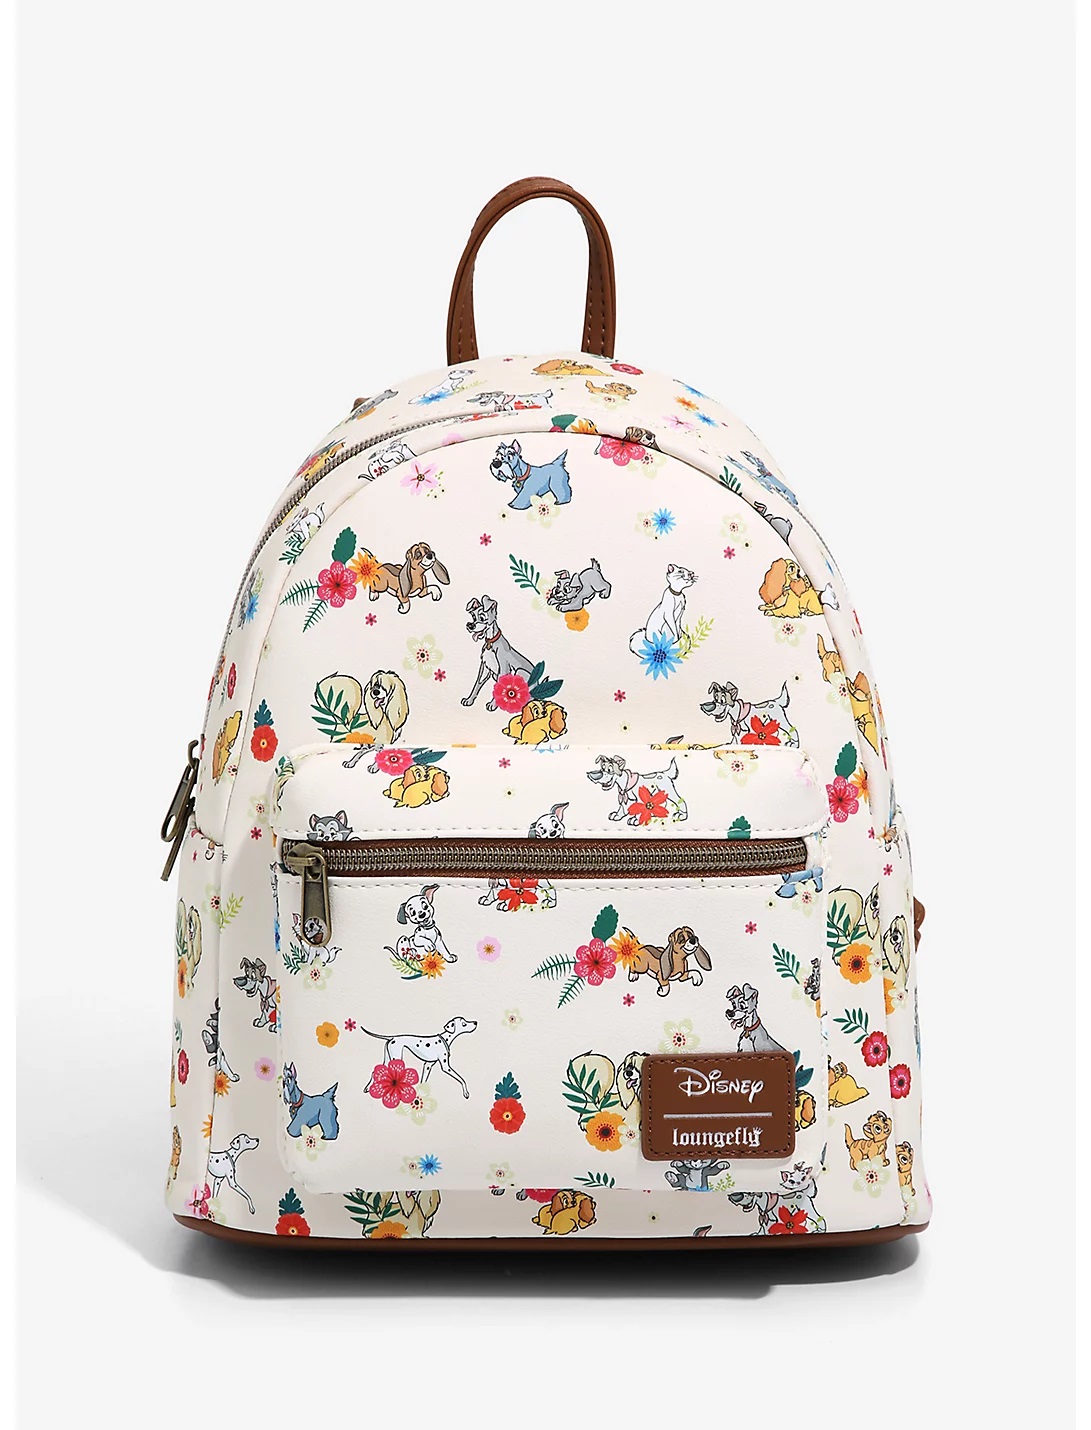 NEW Disney Loungefly Backpacks Just in Time for Spring! Disney by Mark